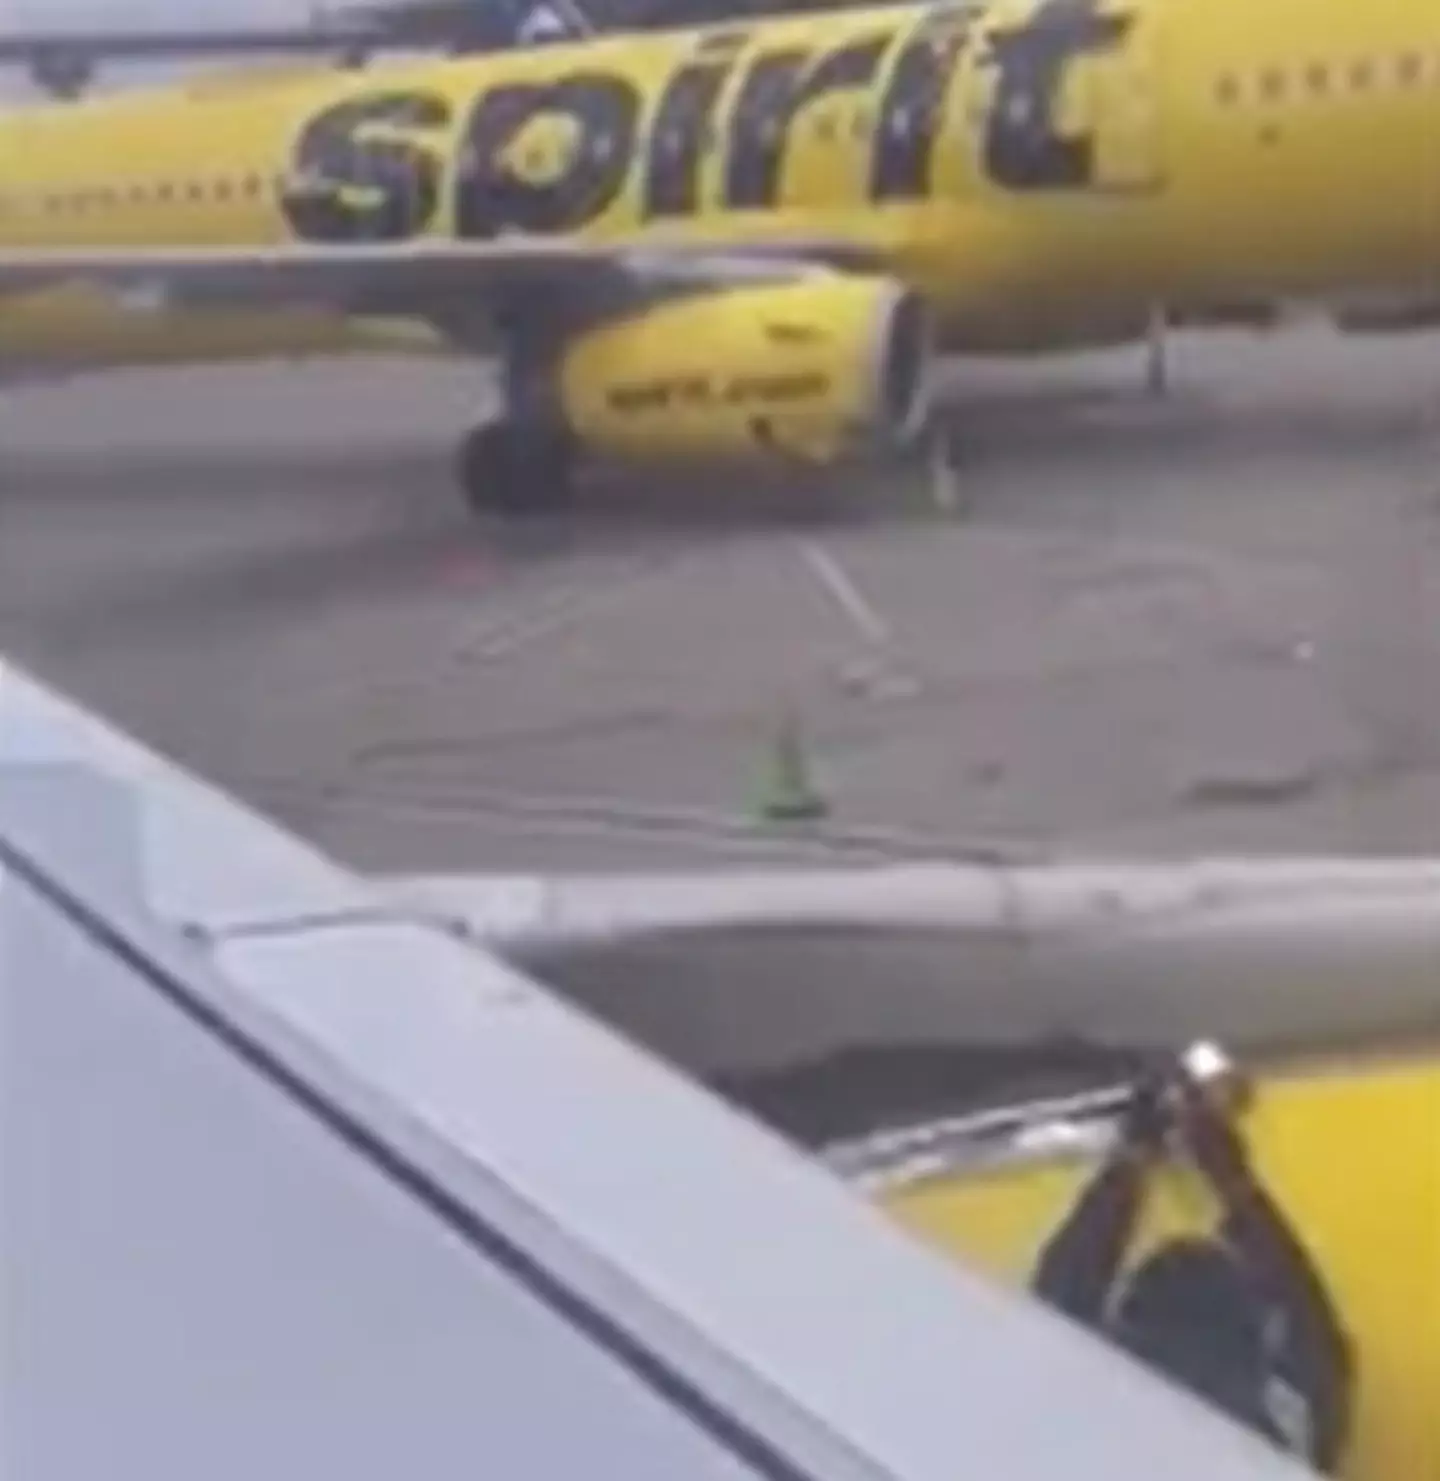 This passenger did not enjoy seeing her plane being taped up before takeoff.